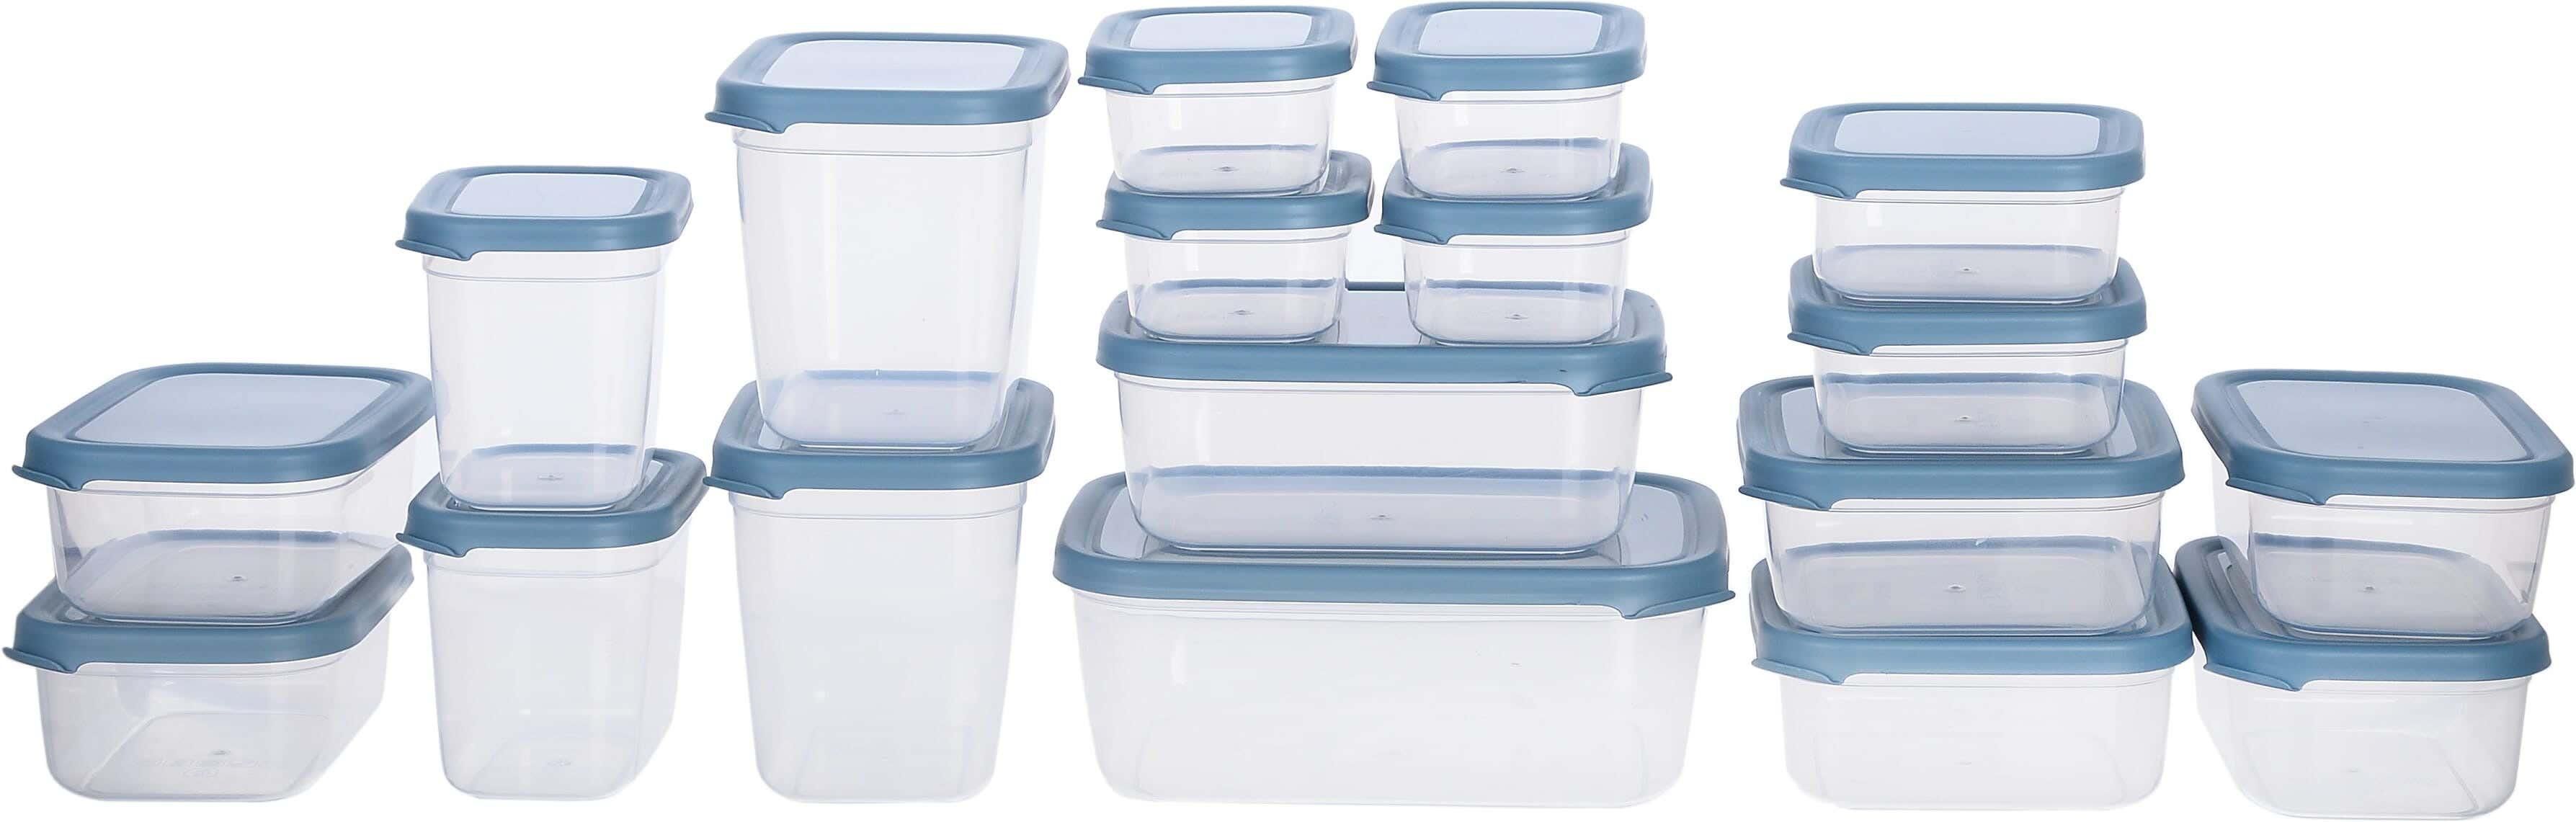 Get Aksa Plastic Refrigerator Box Set, 18 Pieces - Blue Clear with best offers | Raneen.com